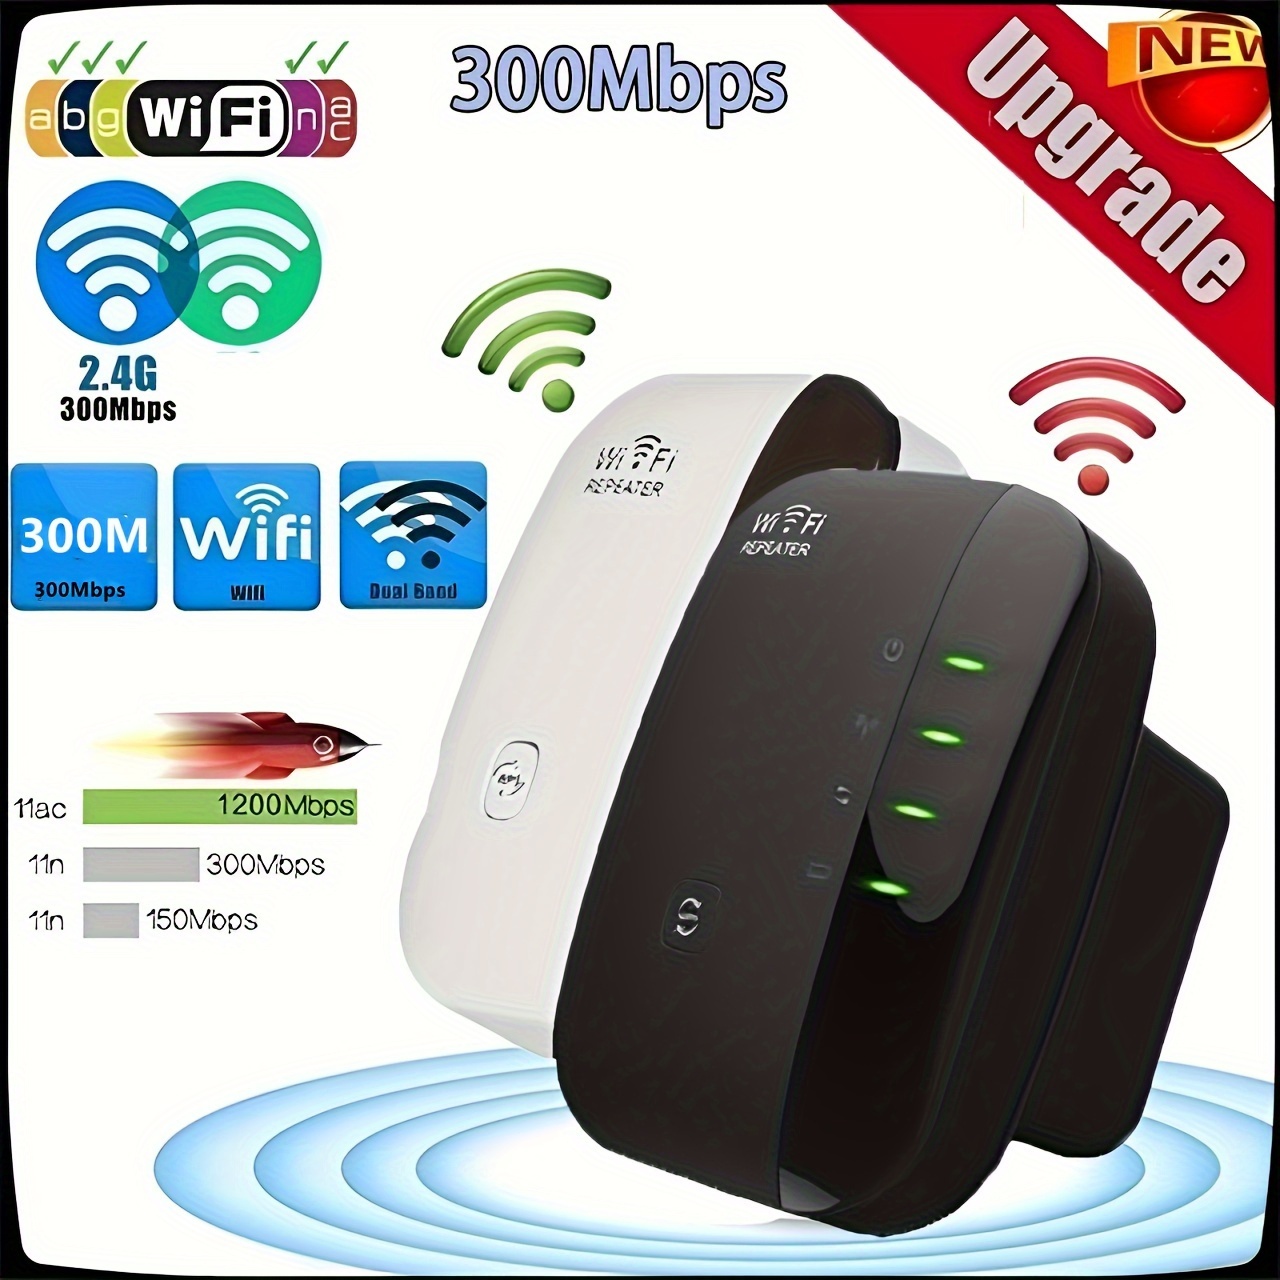 

2024 Newest Wifi Extender, Wifi Booster, Internet Booster - With Ethernet Port, Quick Setup, Home Wireless Signal Booste